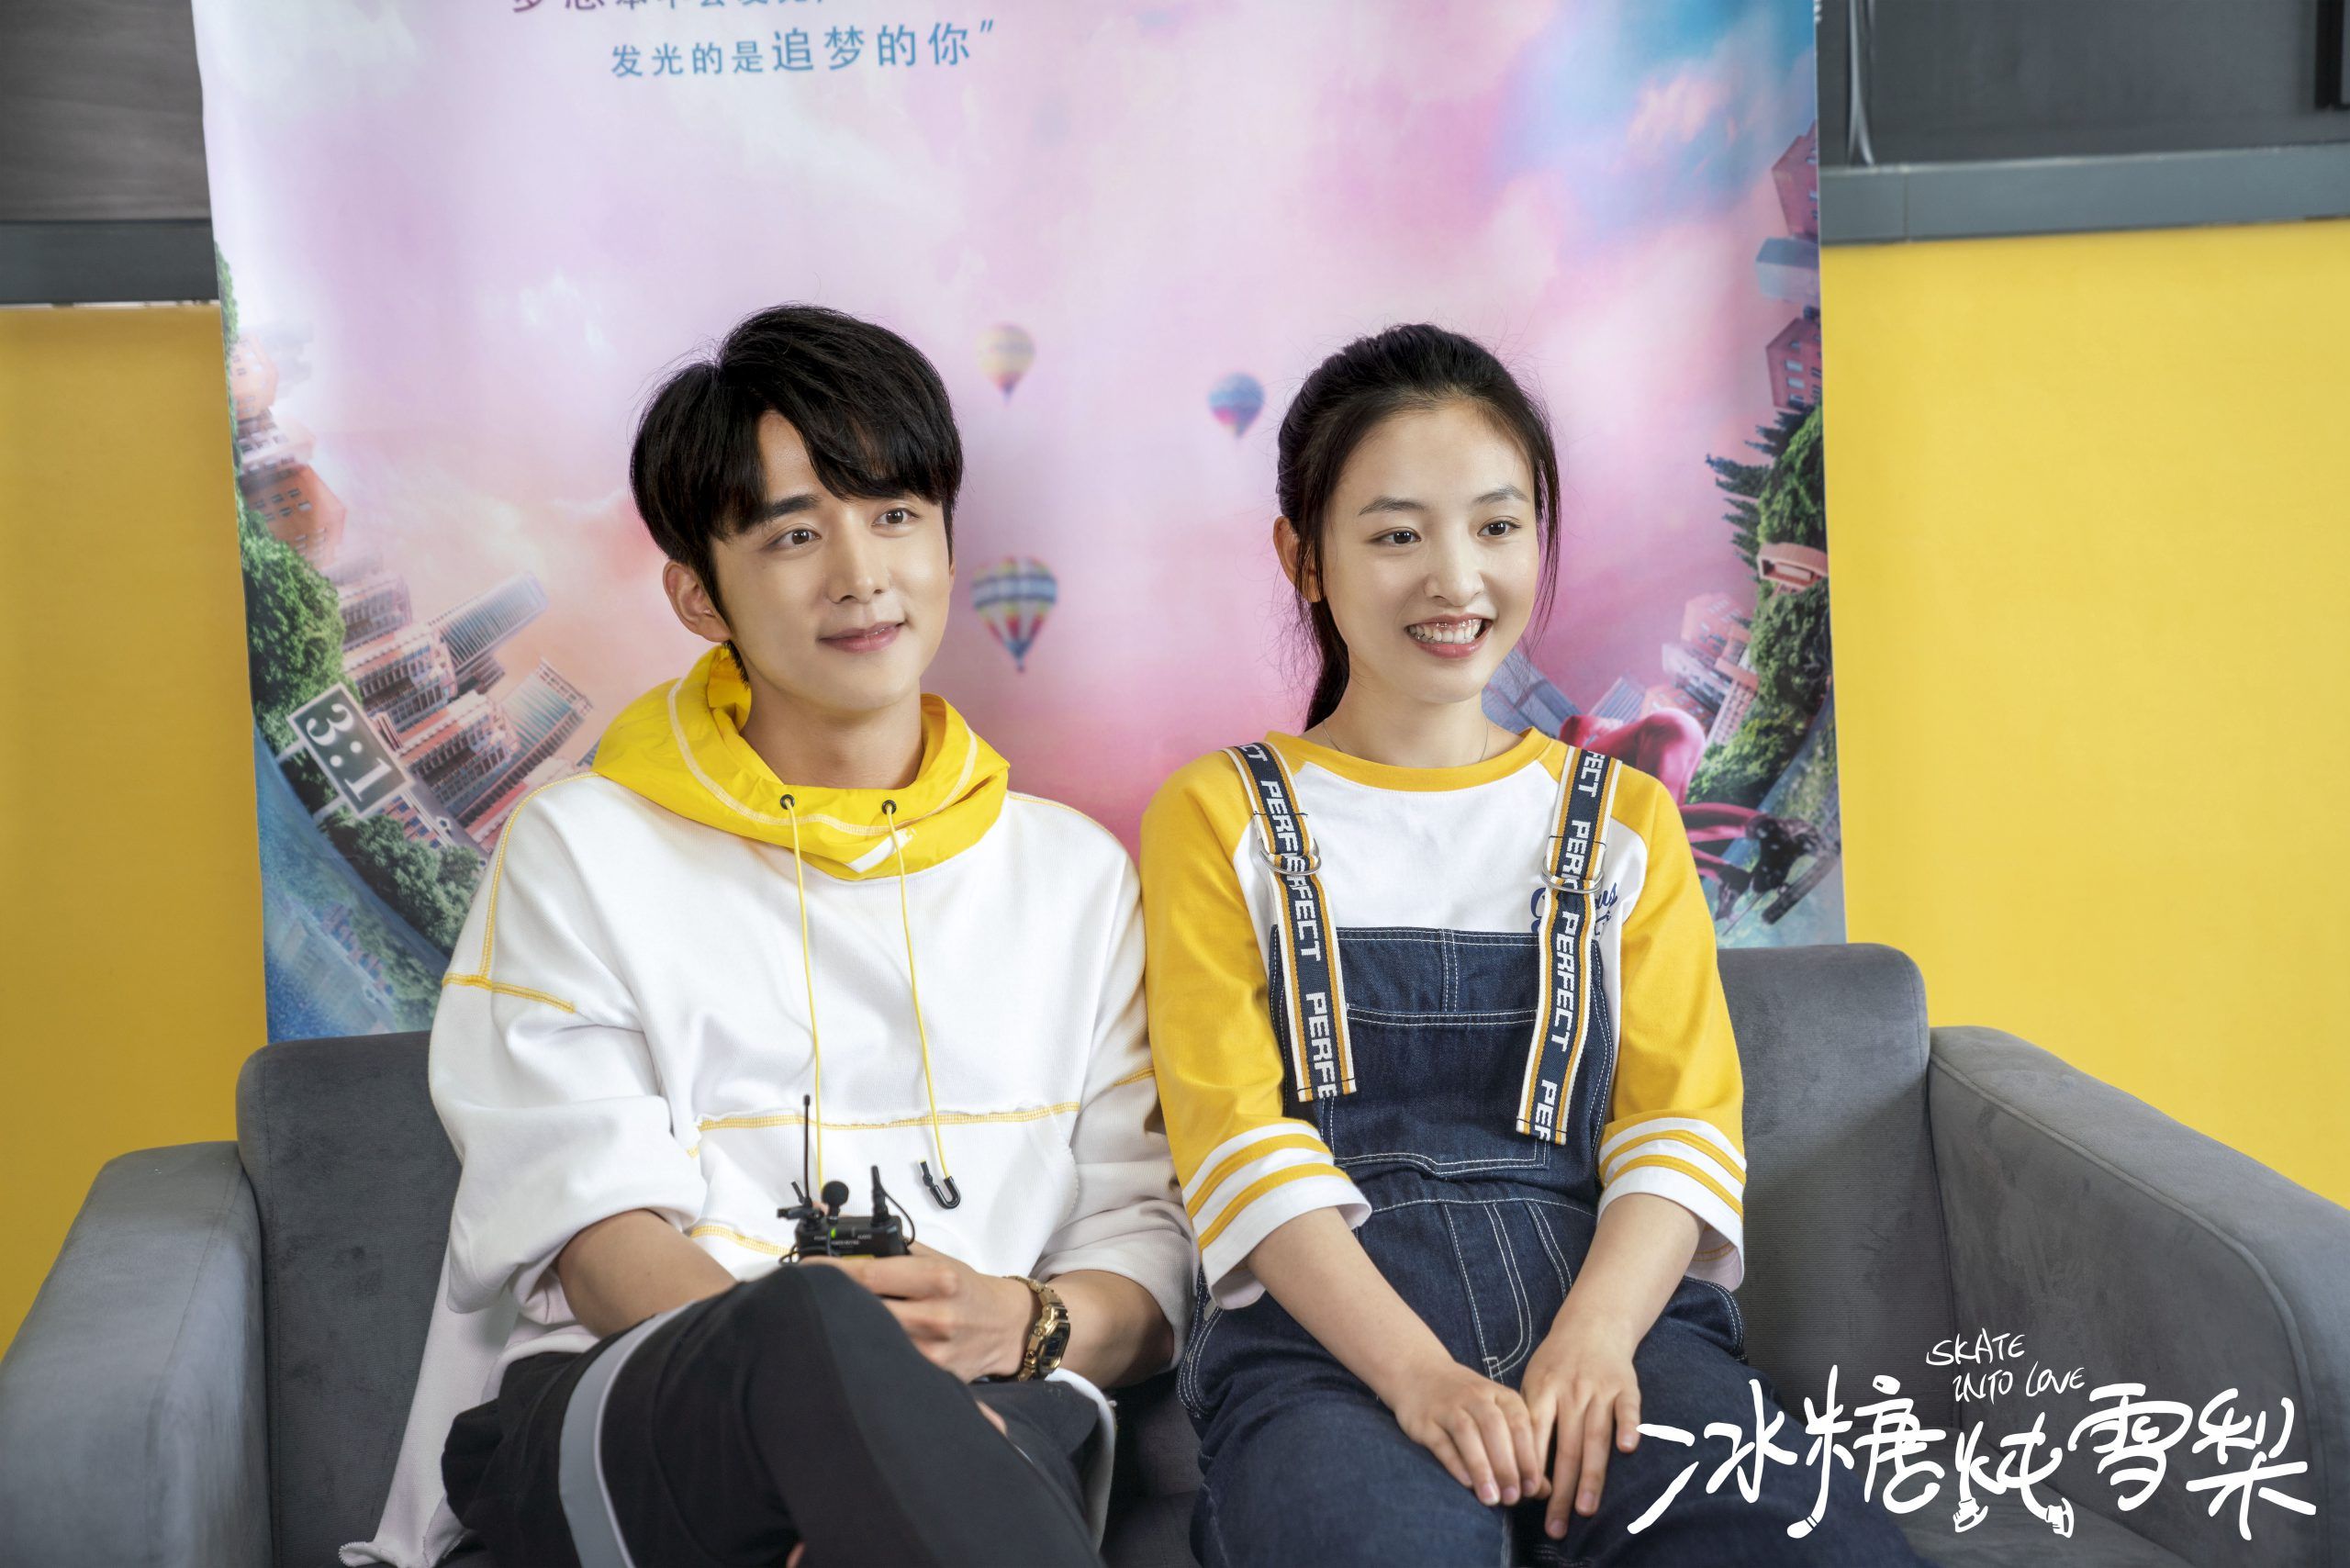 Janice Wu & Steven Zhang's Drama “Skate Into Love” Releases New